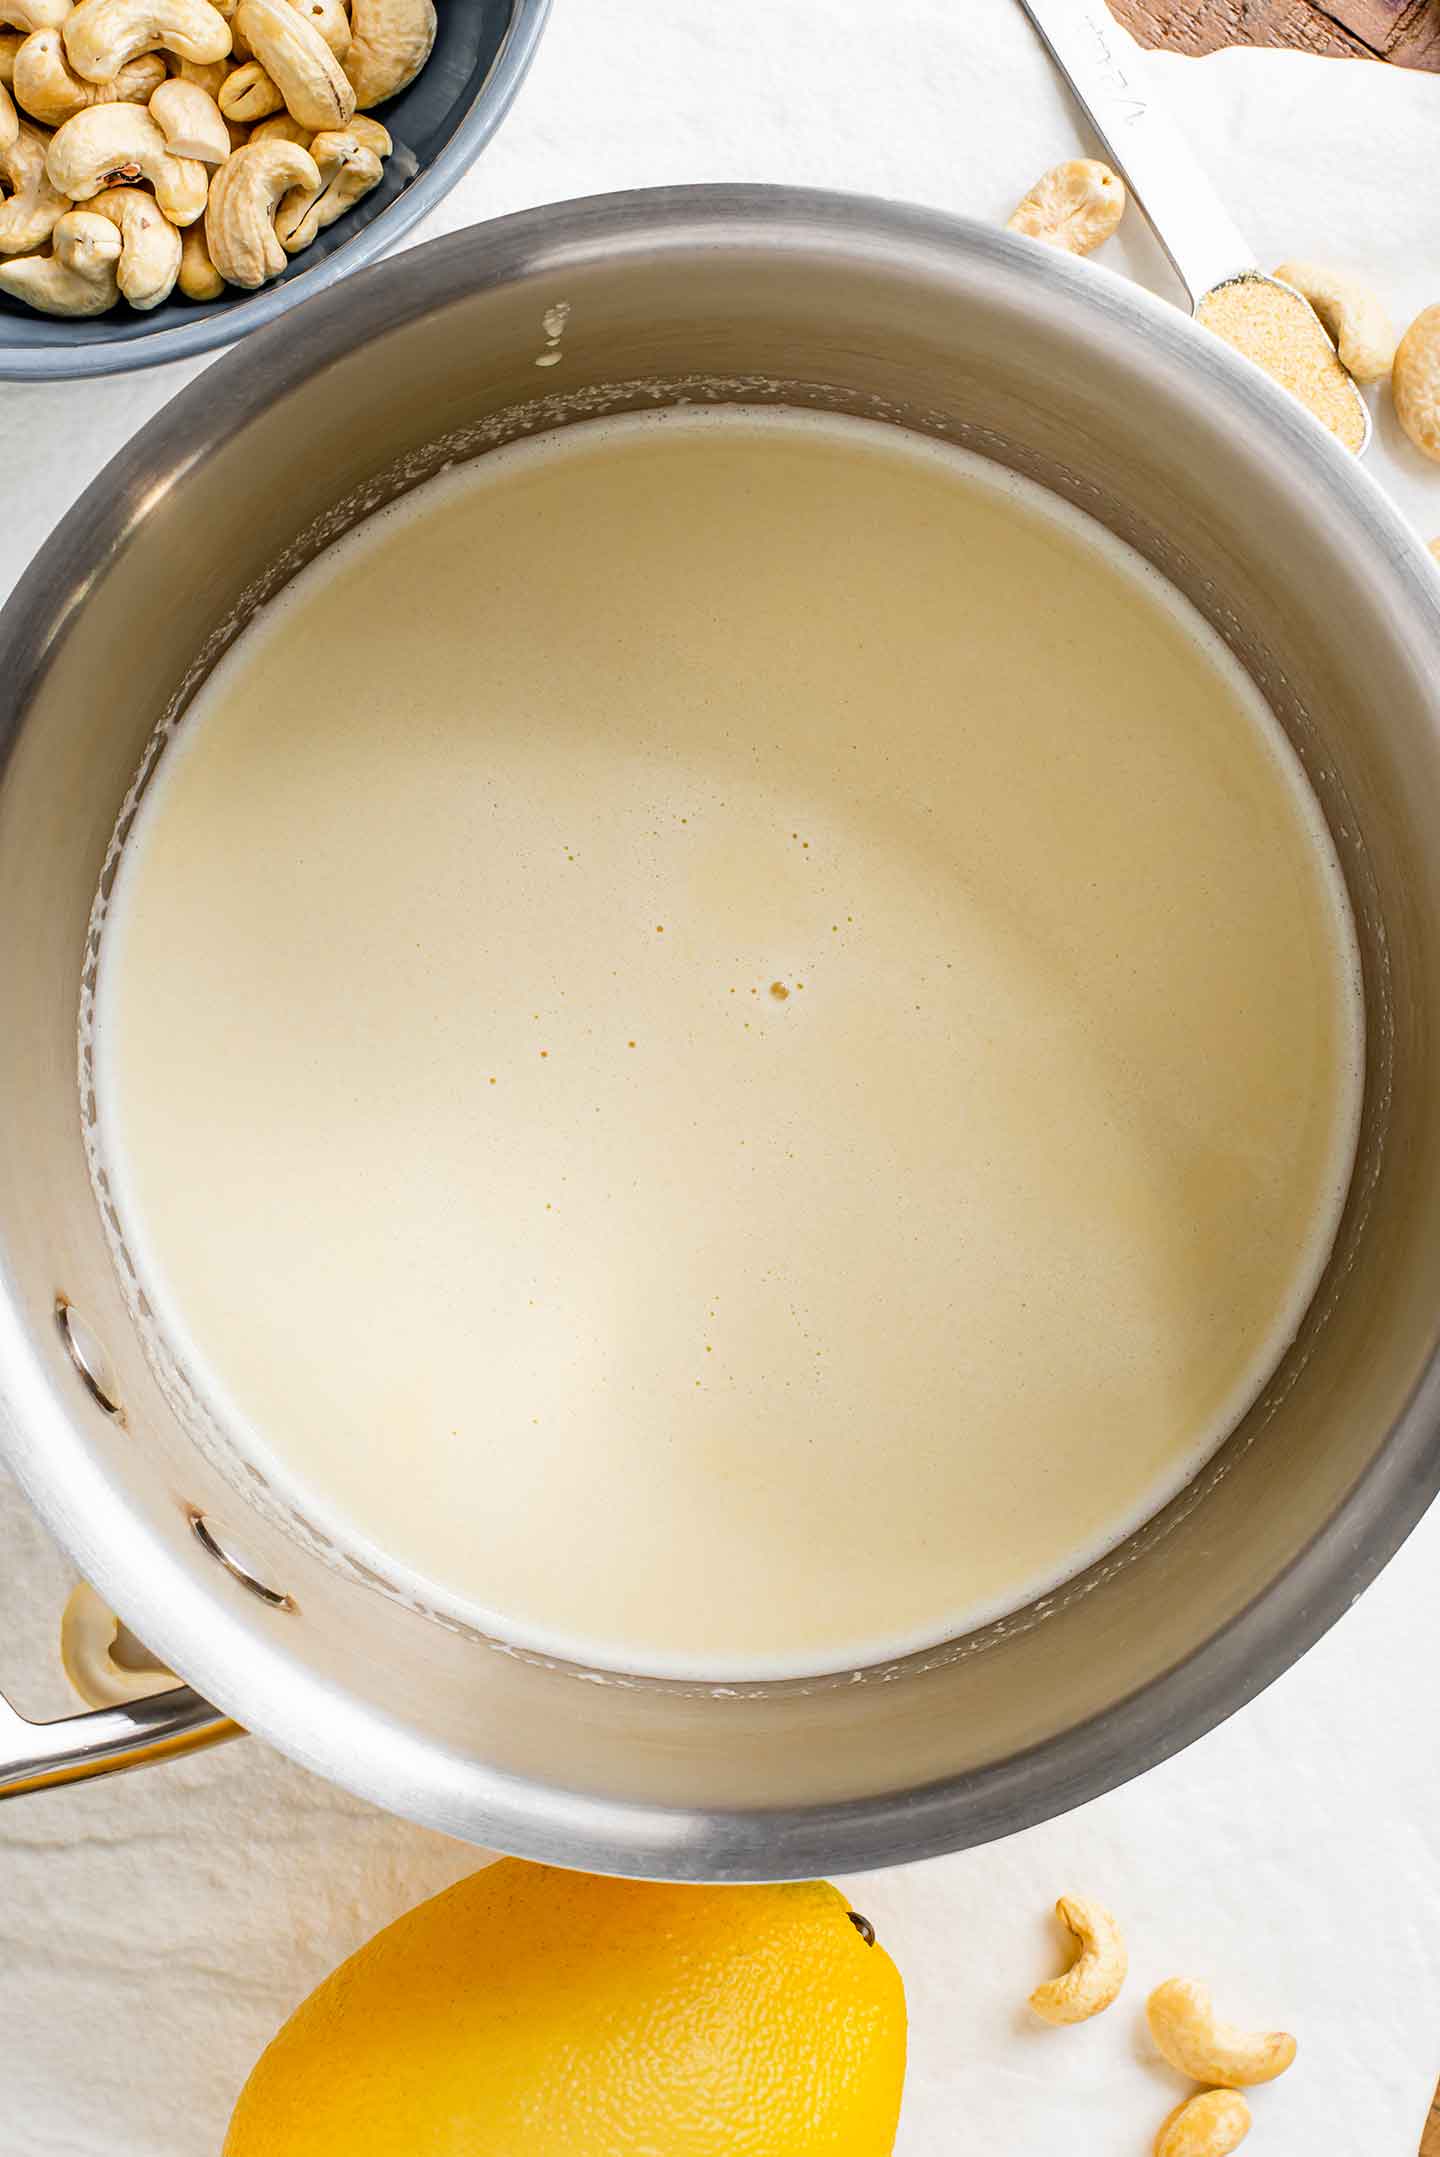 Top down view of a thin blended white sauce in a metal pot.